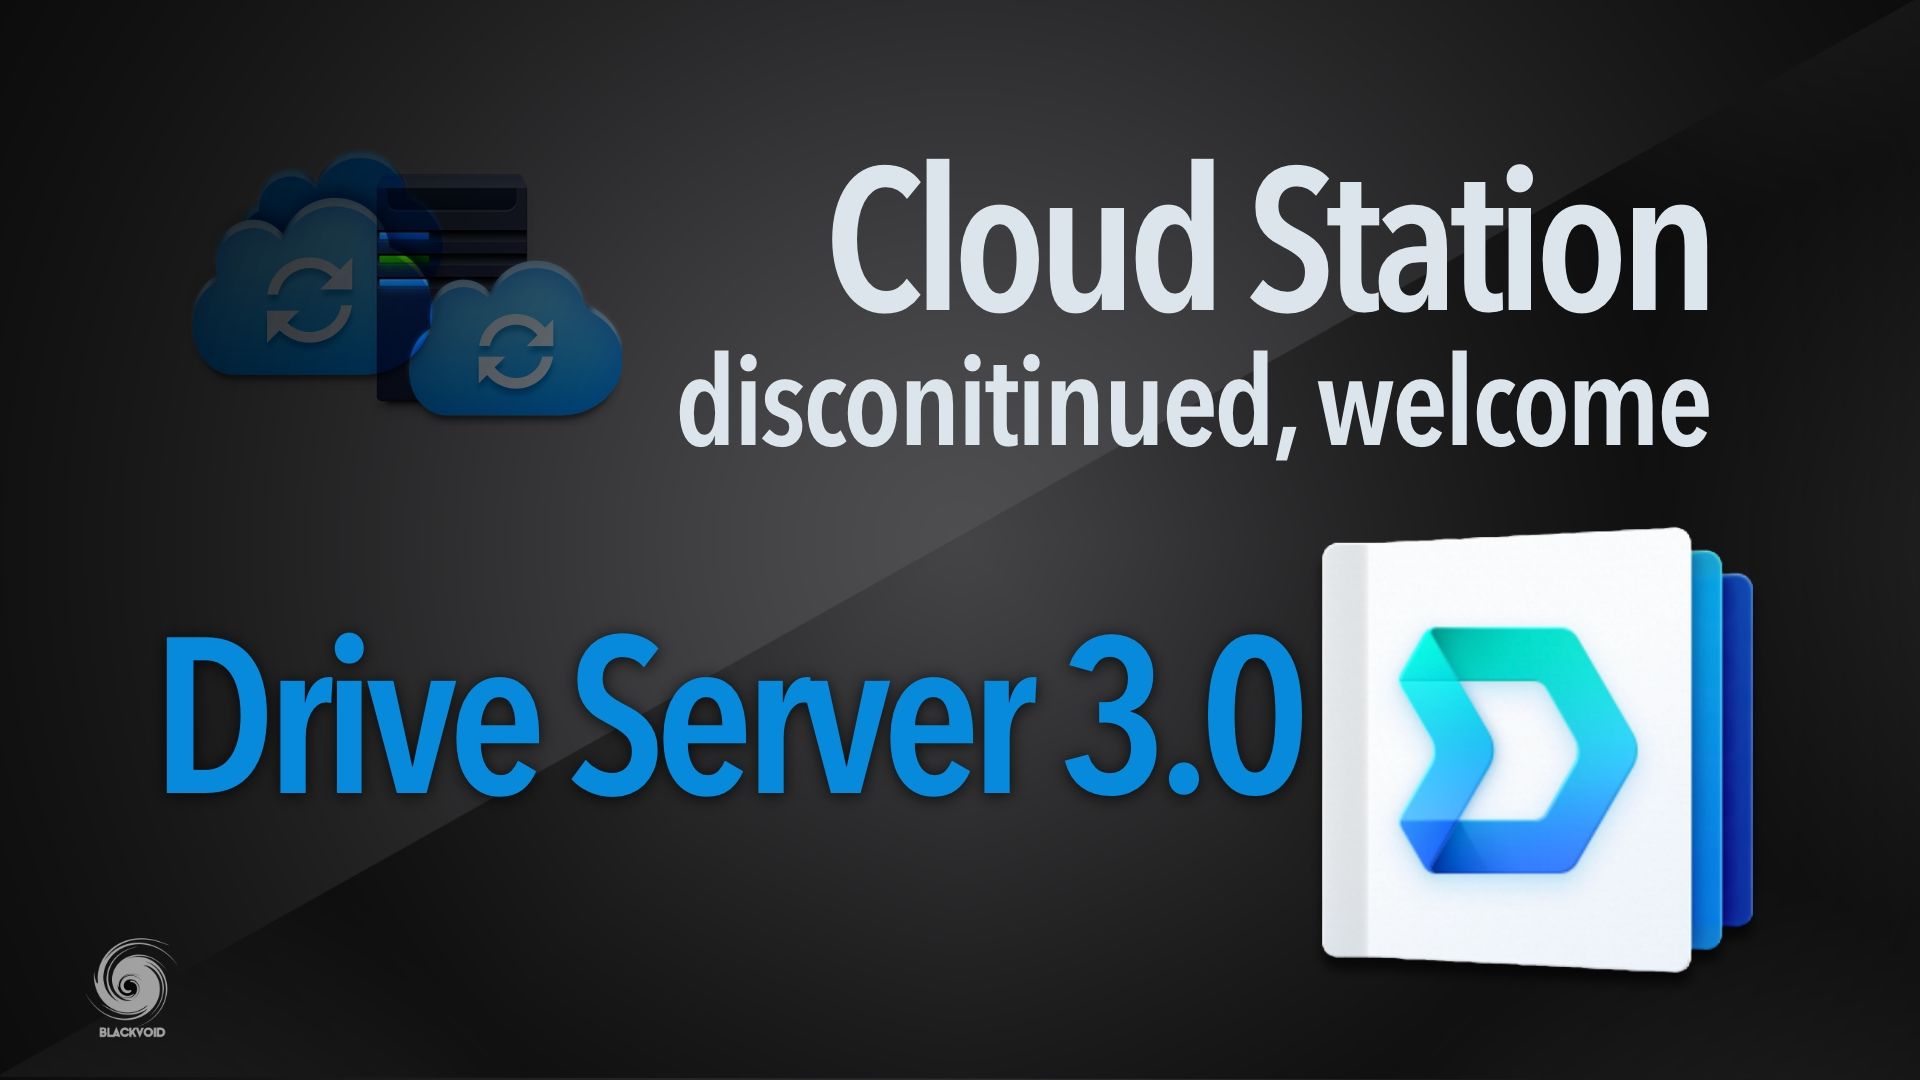 Cloud Station suite to be discontinued in favor of Drive 3.0